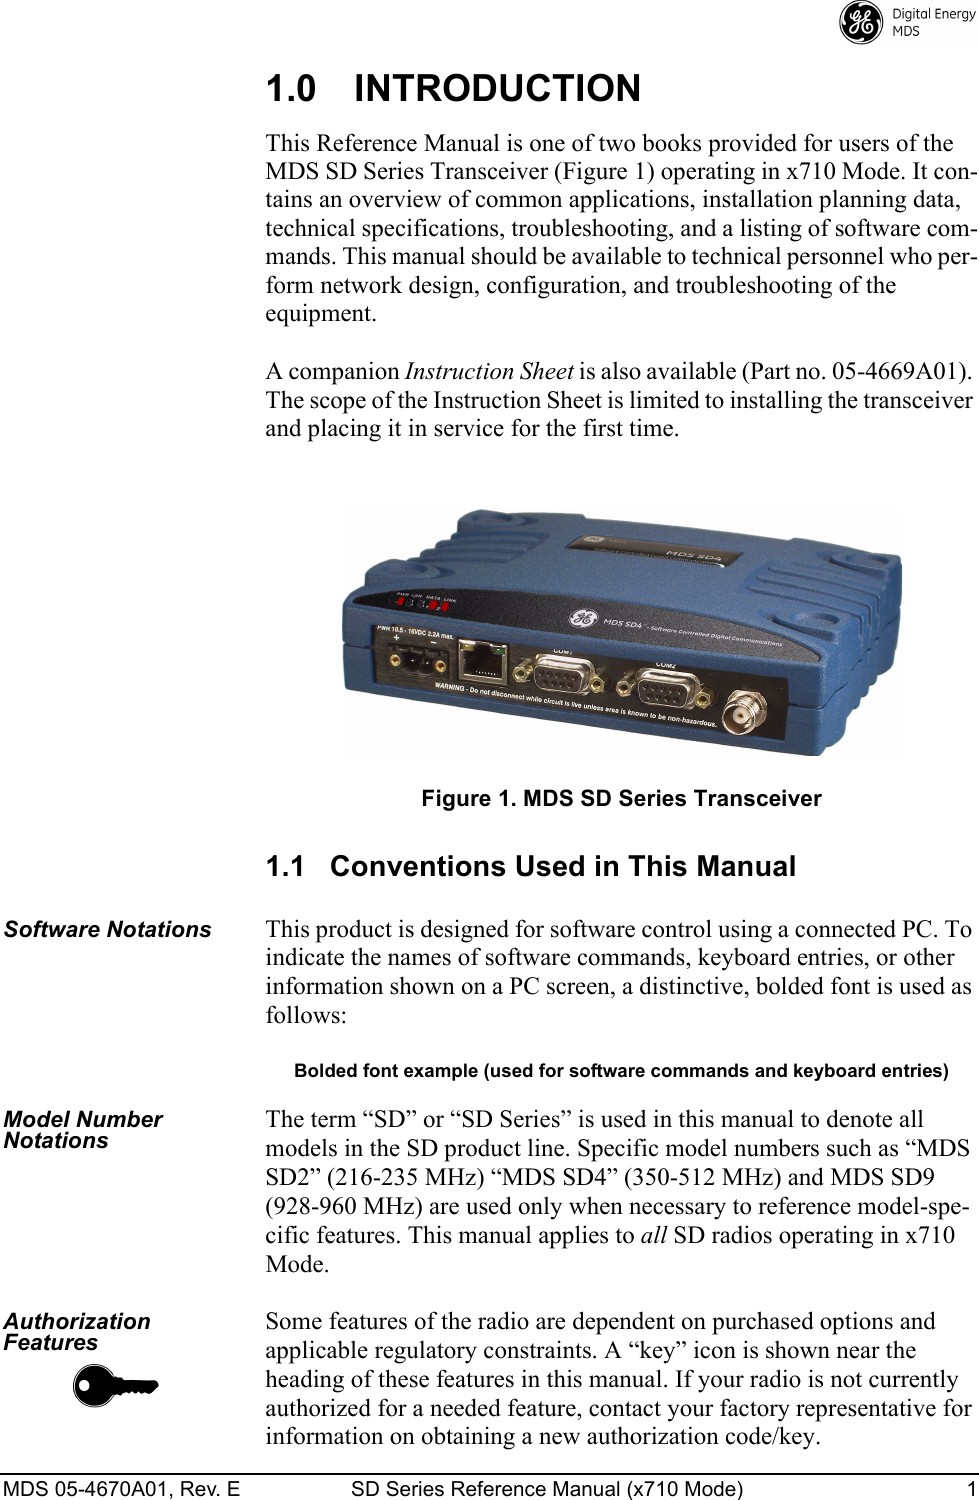 MDS 05-4670A01, Rev. E SD Series Reference Manual (x710 Mode) 1 1.0 INTRODUCTIONThis Reference Manual is one of two books provided for users of the MDS SD Series Transceiver (Figure 1) operating in x710 Mode. It con-tains an overview of common applications, installation planning data, technical specifications, troubleshooting, and a listing of software com-mands. This manual should be available to technical personnel who per-form network design, configuration, and troubleshooting of the equipment.A companion Instruction Sheet is also available (Part no. 05-4669A01). The scope of the Instruction Sheet is limited to installing the transceiver and placing it in service for the first time.Invisible place holderFigure 1. MDS SD Series Transceiver1.1 Conventions Used in This ManualSoftware NotationsThis product is designed for software control using a connected PC. To indicate the names of software commands, keyboard entries, or other information shown on a PC screen, a distinctive, bolded font is used as follows:Bolded font example (used for software commands and keyboard entries)Model Number NotationsThe term “SD” or “SD Series” is used in this manual to denote all models in the SD product line. Specific model numbers such as “MDS SD2” (216-235 MHz) “MDS SD4” (350-512 MHz) and MDS SD9 (928-960 MHz) are used only when necessary to reference model-spe-cific features. This manual applies to all SD radios operating in x710 Mode.Authorization Features Some features of the radio are dependent on purchased options and applicable regulatory constraints. A “key” icon is shown near the heading of these features in this manual. If your radio is not currently authorized for a needed feature, contact your factory representative for information on obtaining a new authorization code/key.